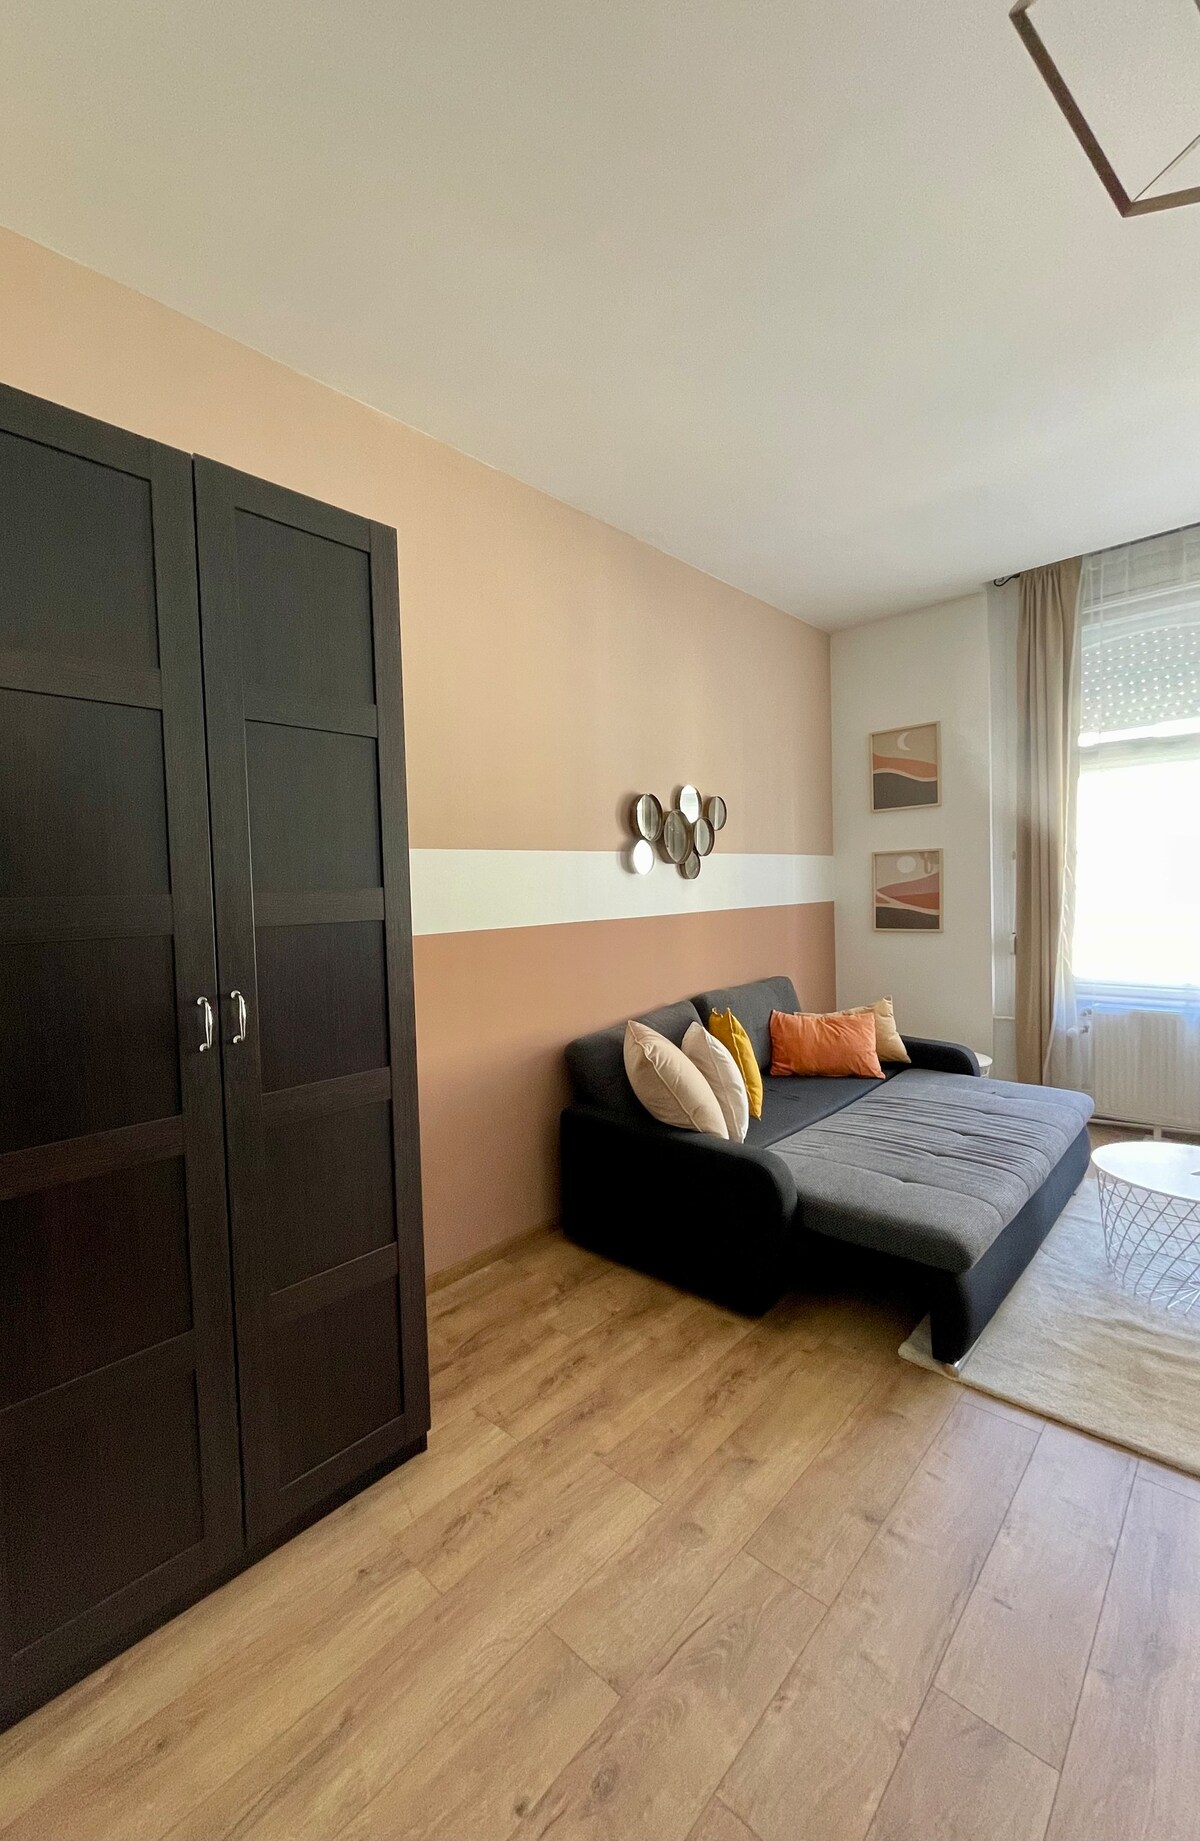 An apartment close to the center and River Danube